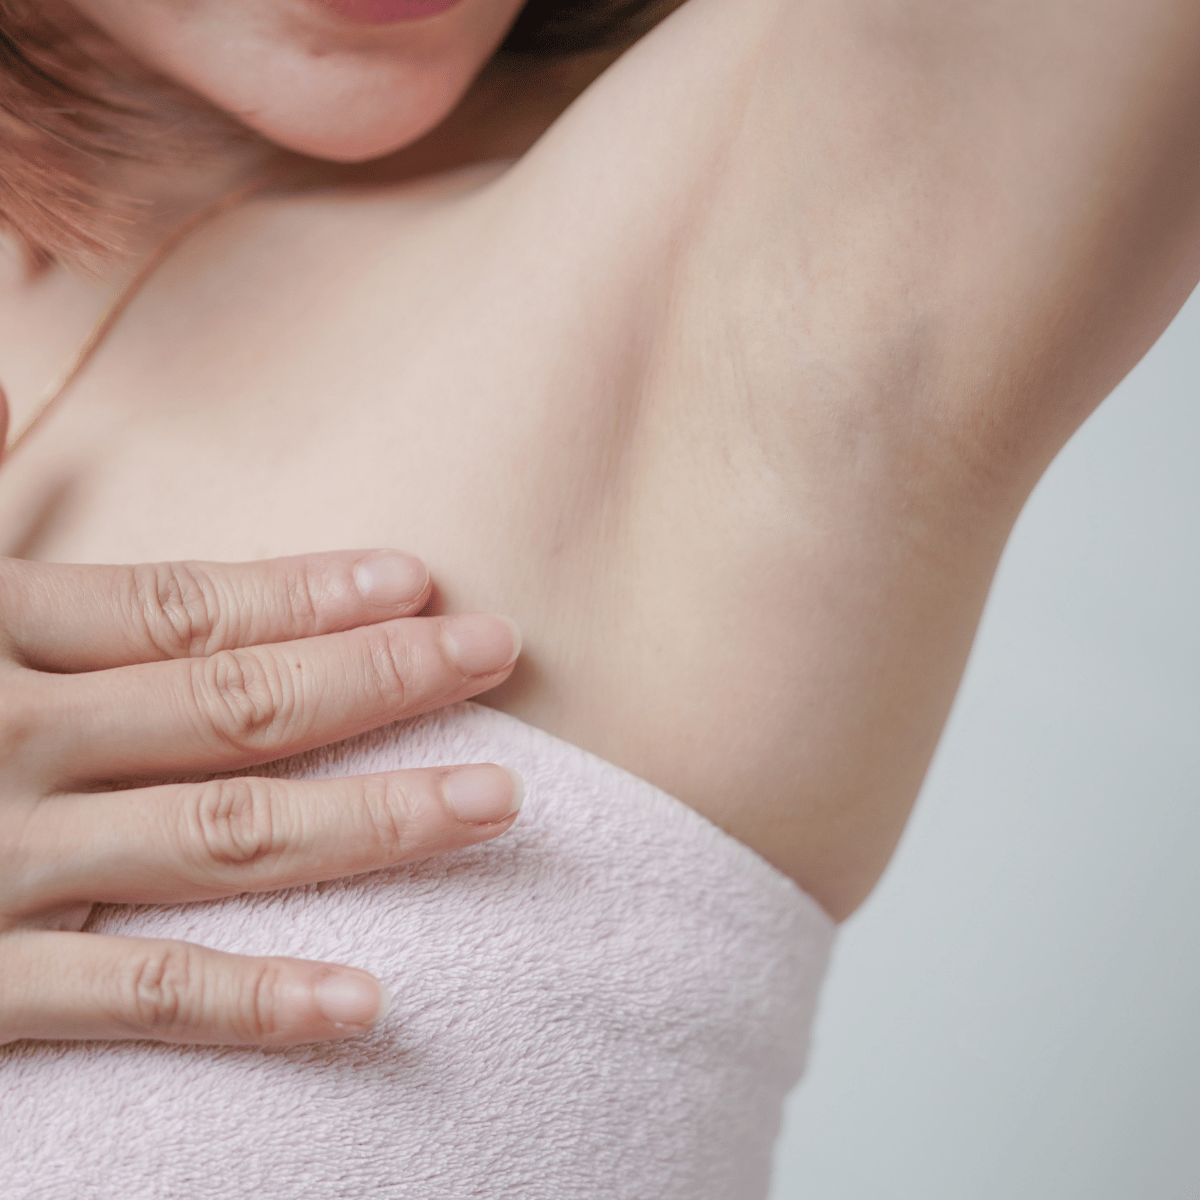 Armpit Detox: What Are the Benefits and Challenges?